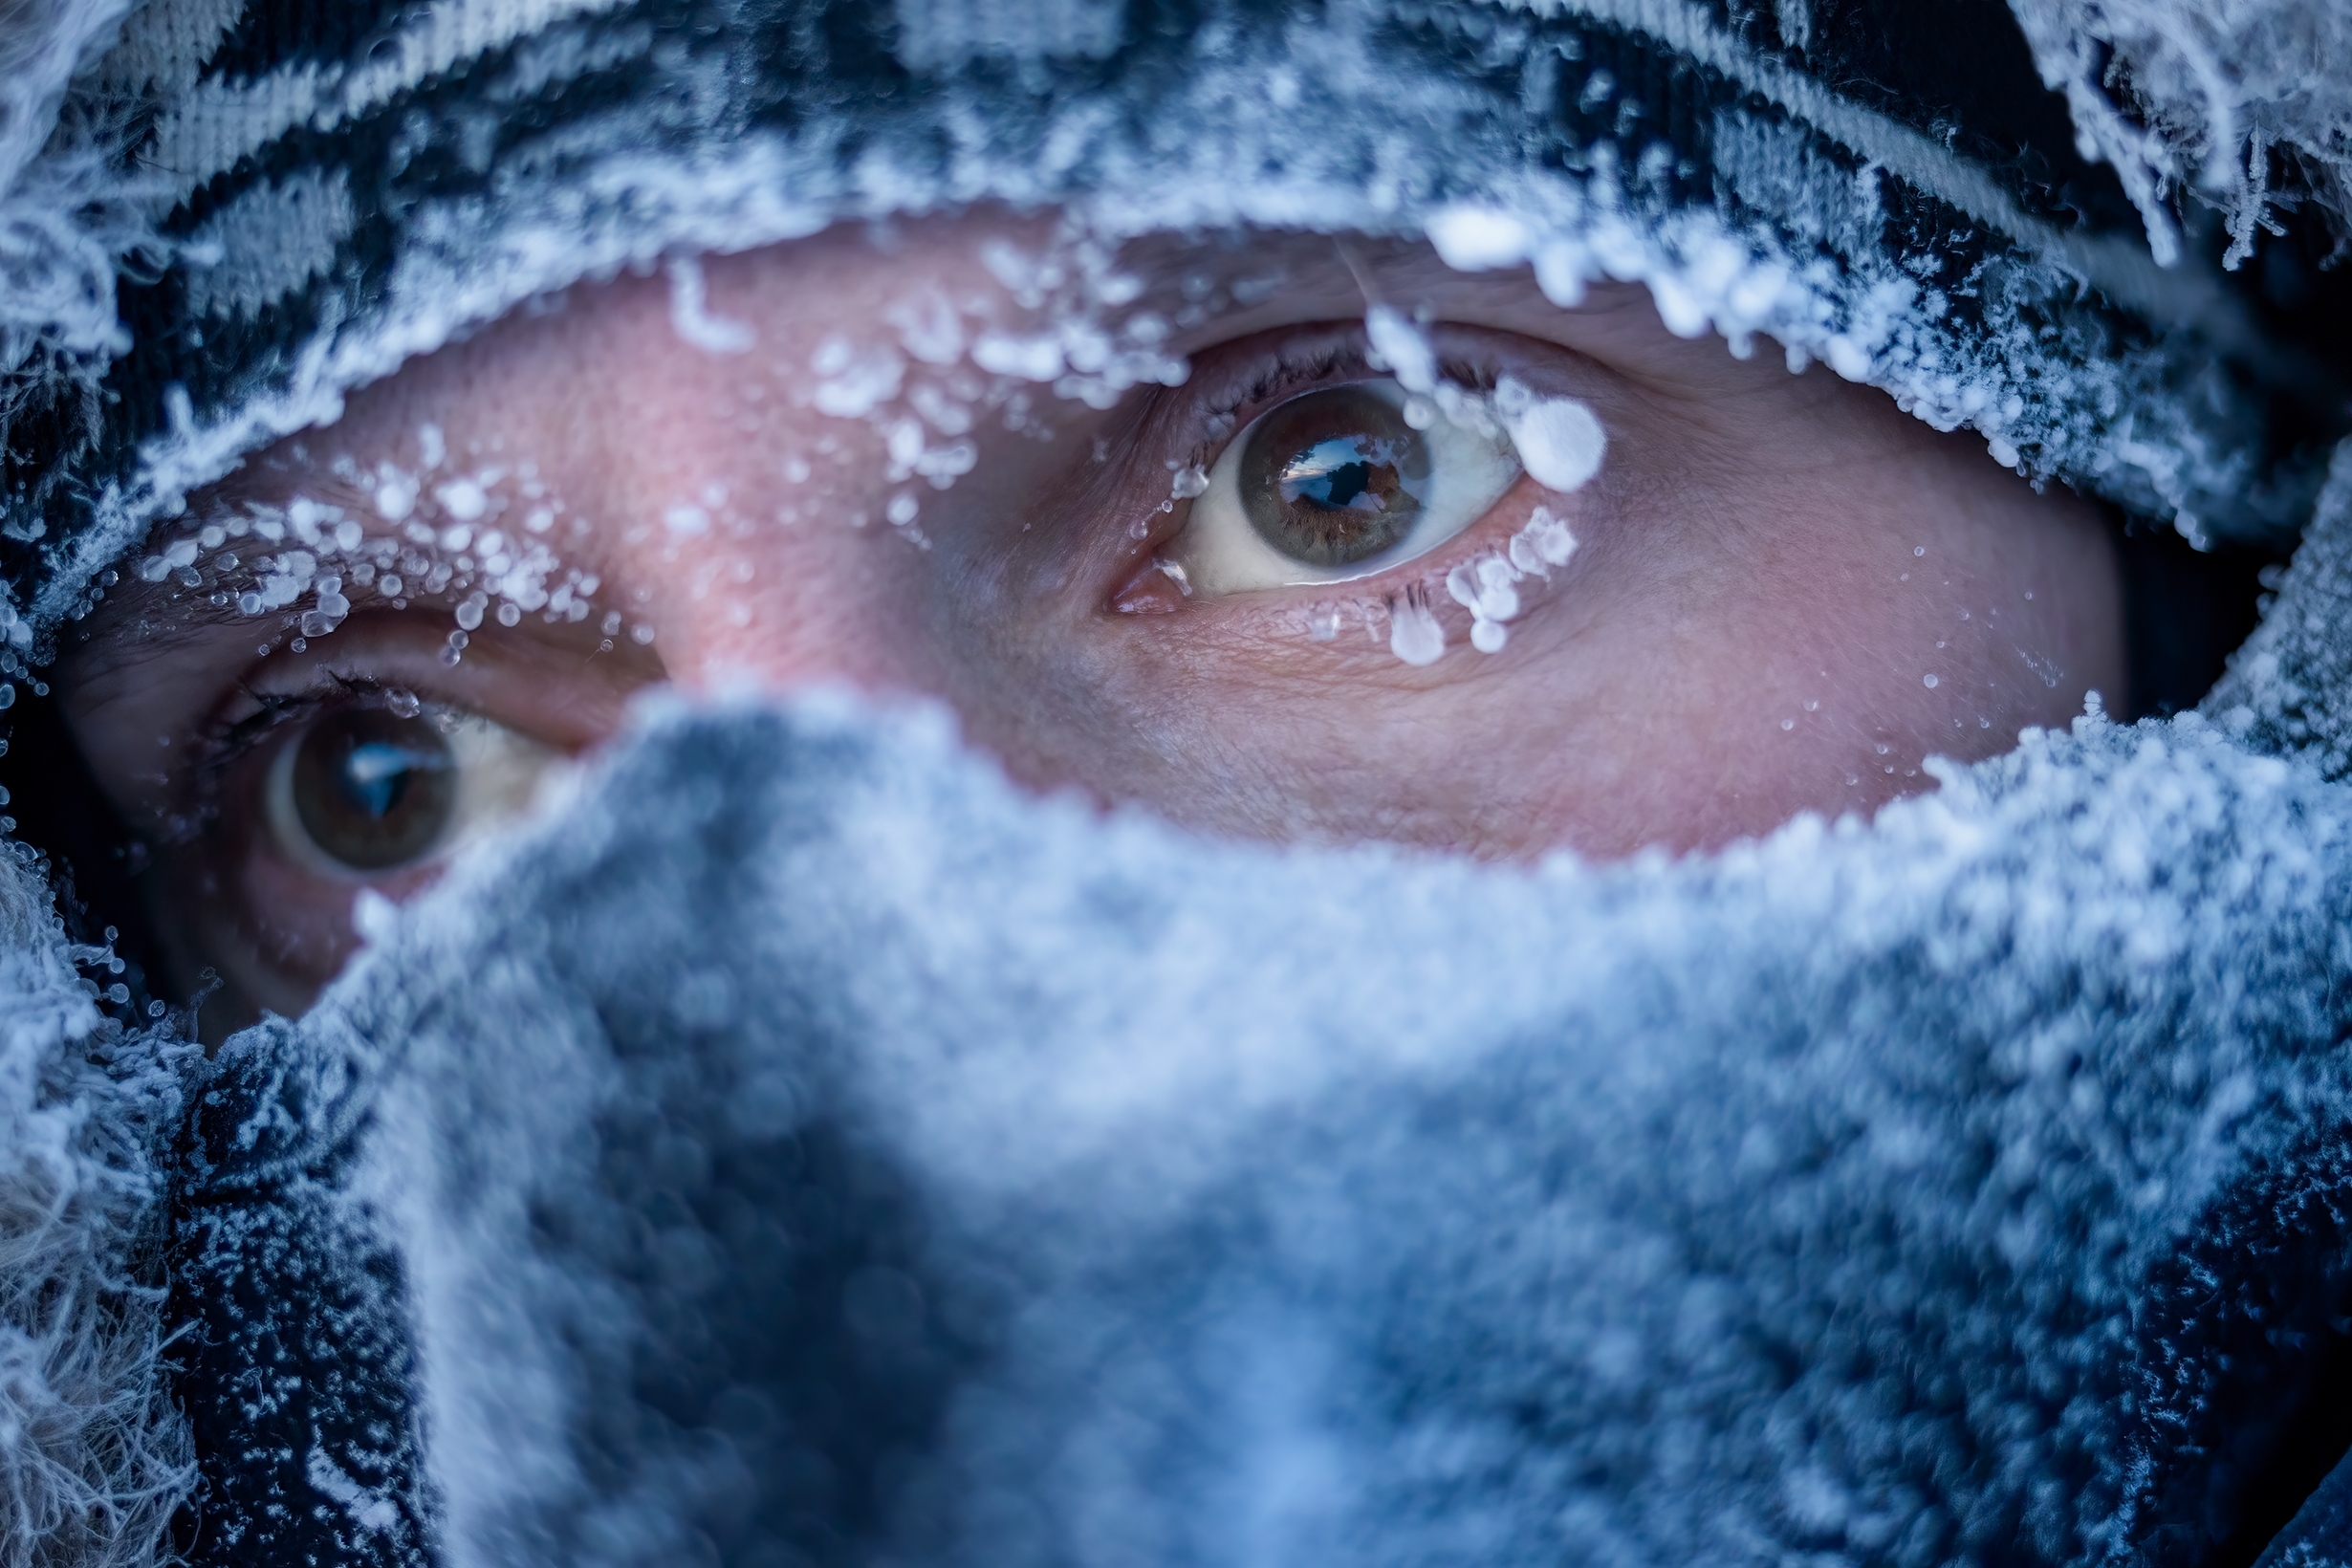 Portrait of a man in winter clothes and a mask. | Source: Shutterstock